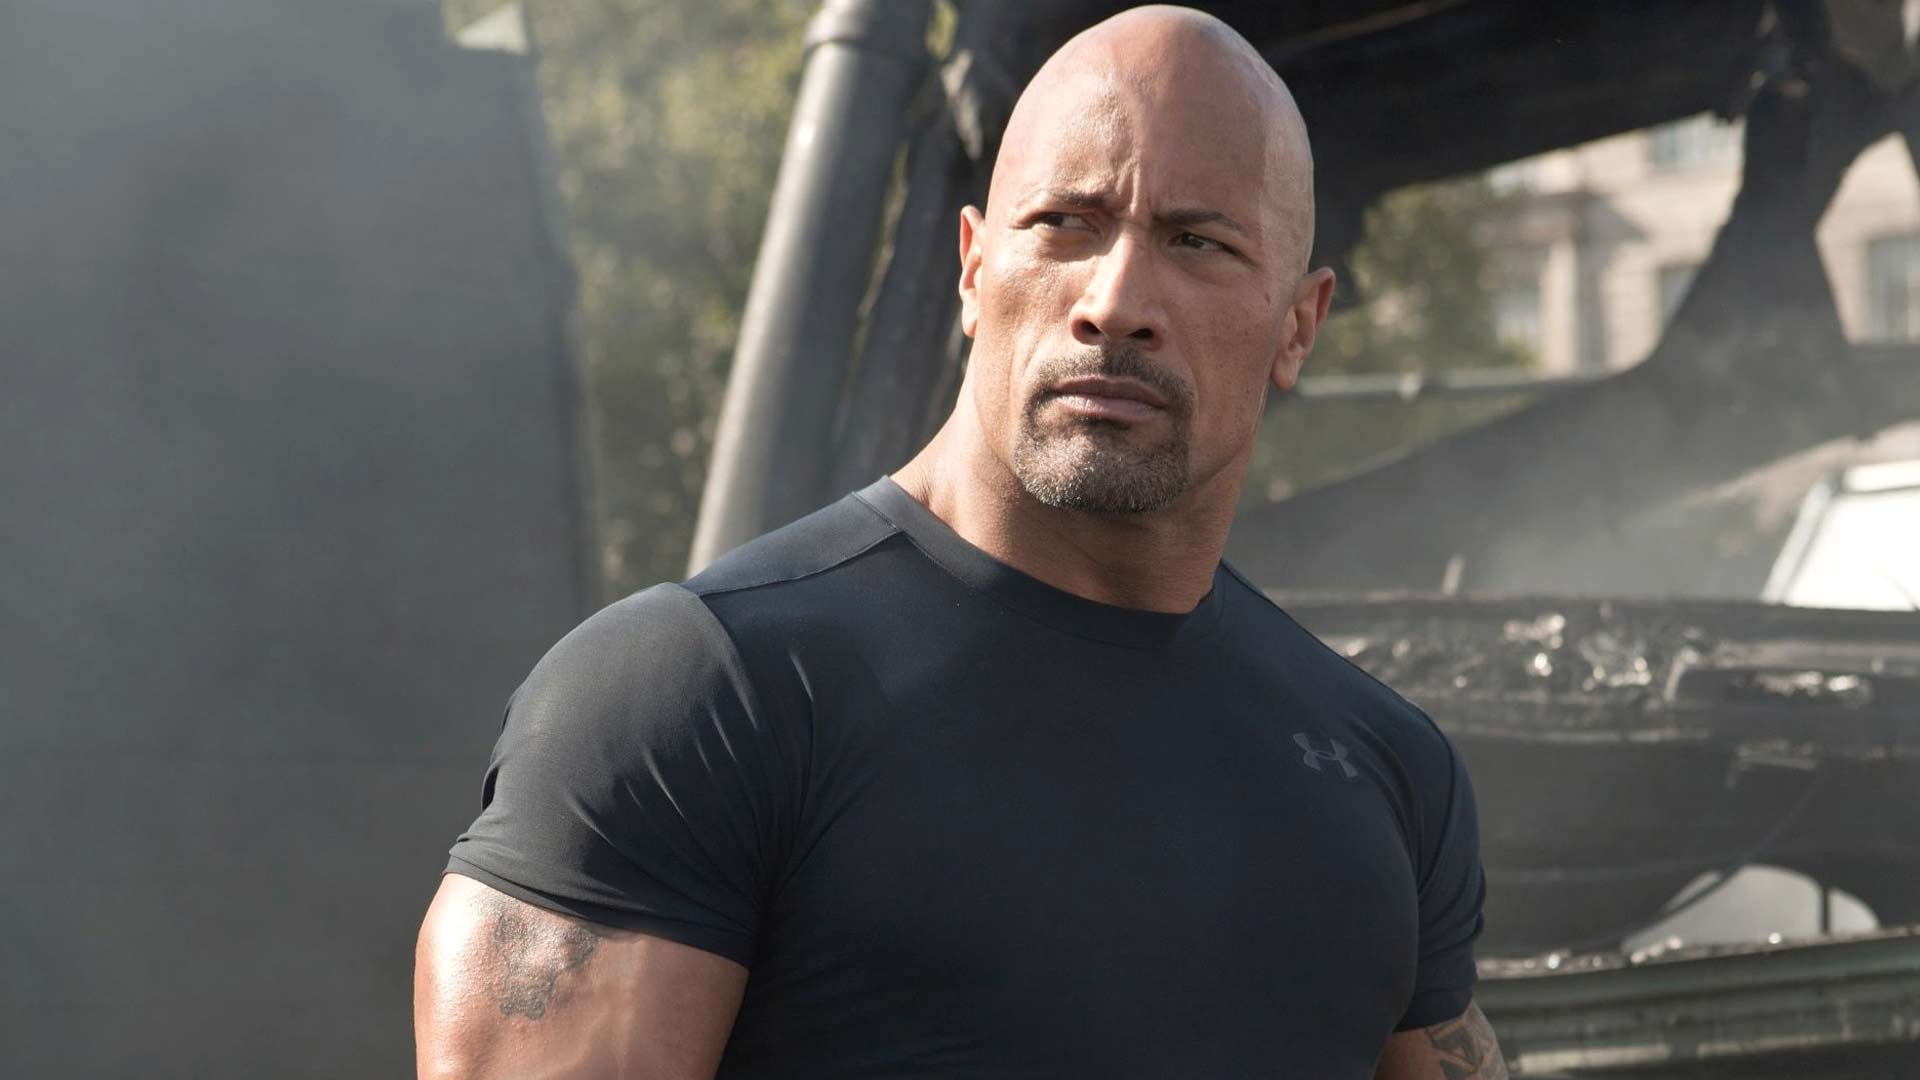 San andreas the rock wallpapers Free full hd wallpapers for